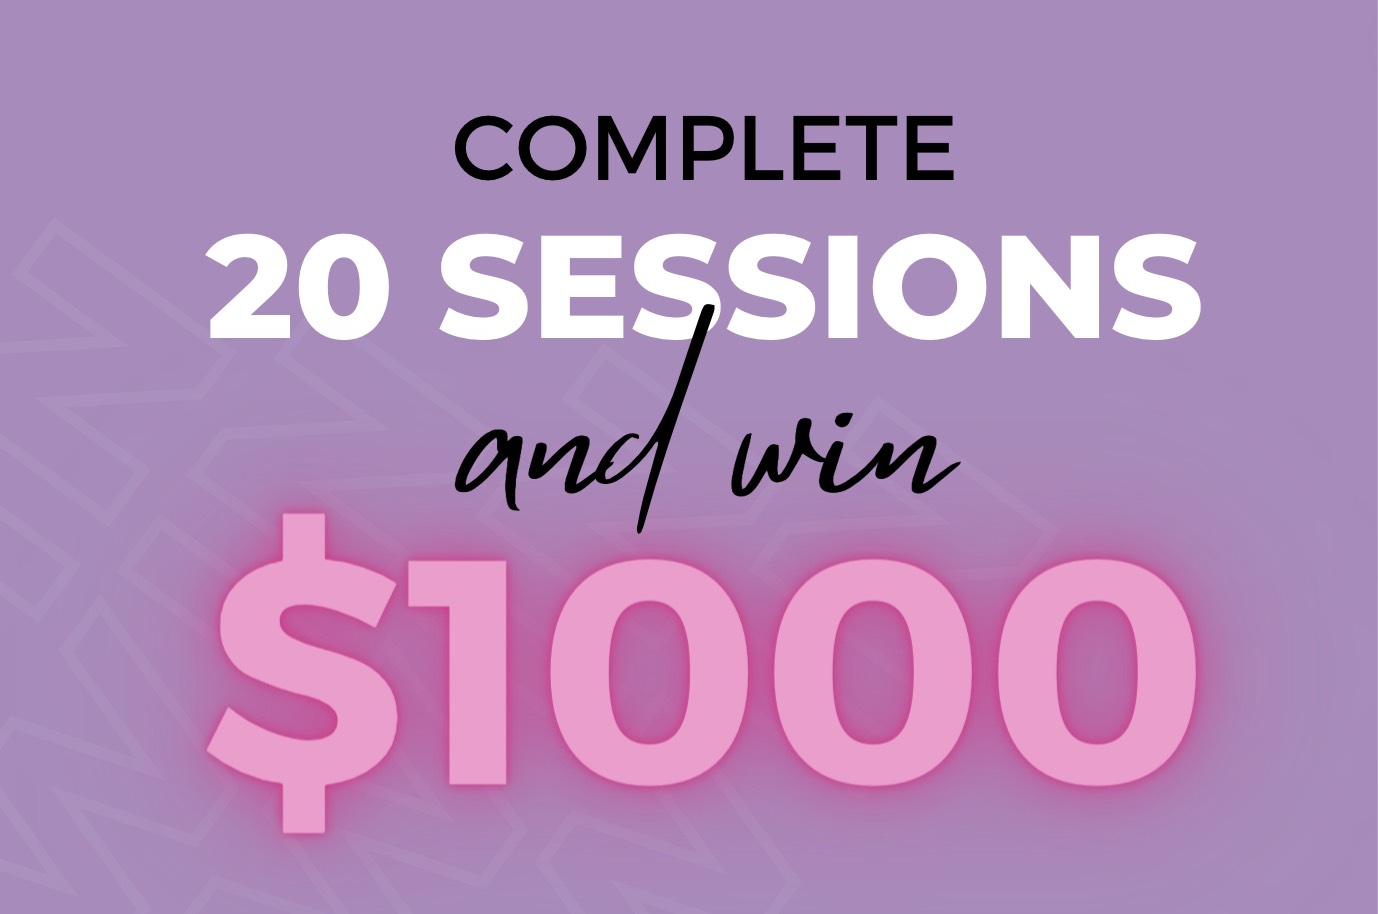 Complete 20 Sessions & WIN